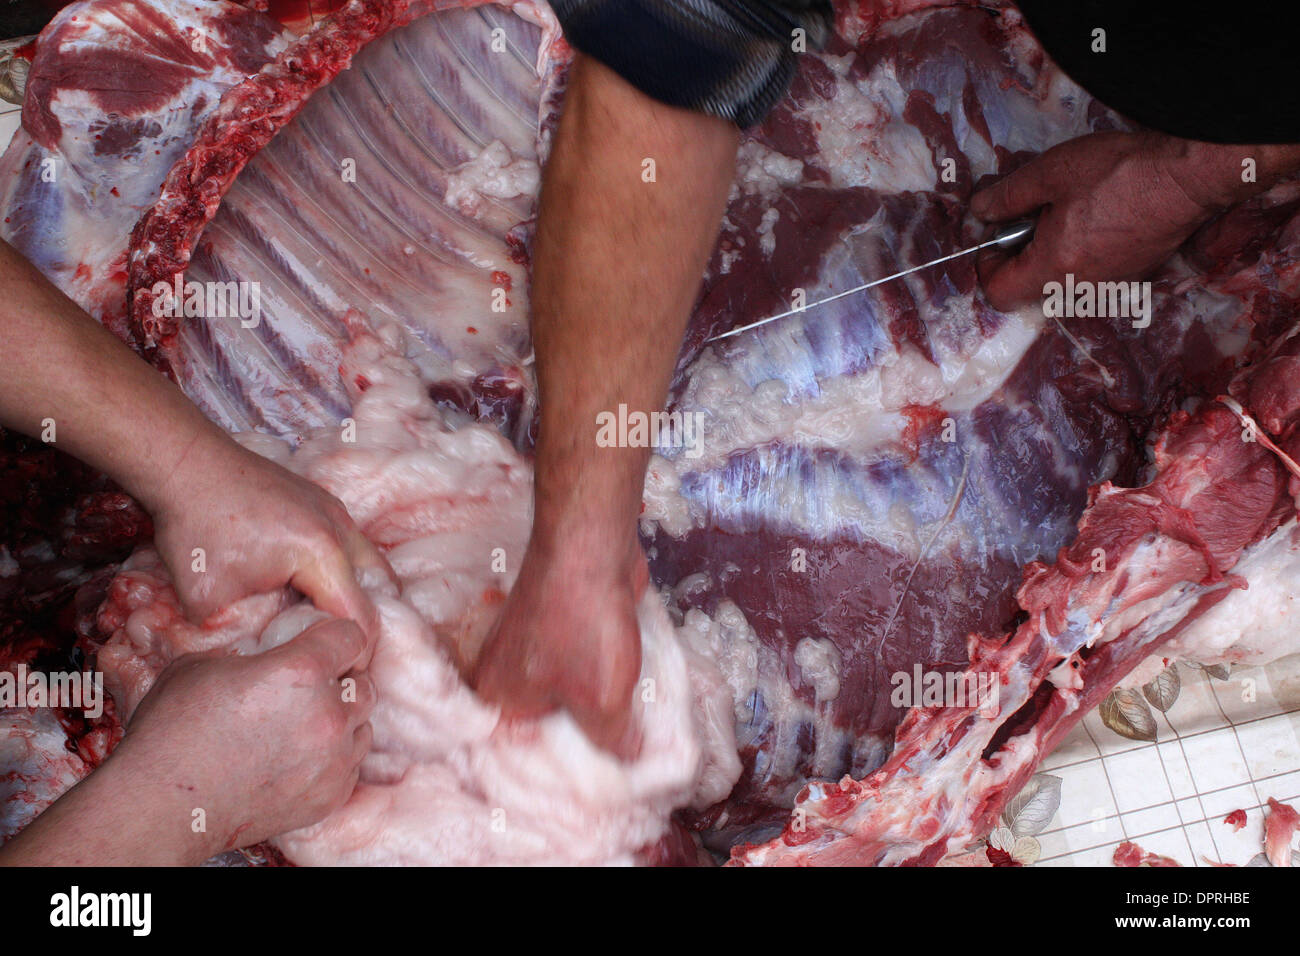 Dec 20, 2008 - Romania - Two men slice out parts of the innards of a pig after a pig slaughtering at their home in a rural Romanian village as part of their yearly ritual, a few days before Christmas. The Romanian Ministry of Agriculture and Rural Development expects 2.5-2.8 million pigs will be slaughtered in Romania this holiday season, up from 2.13 million last year in the same  Stock Photo